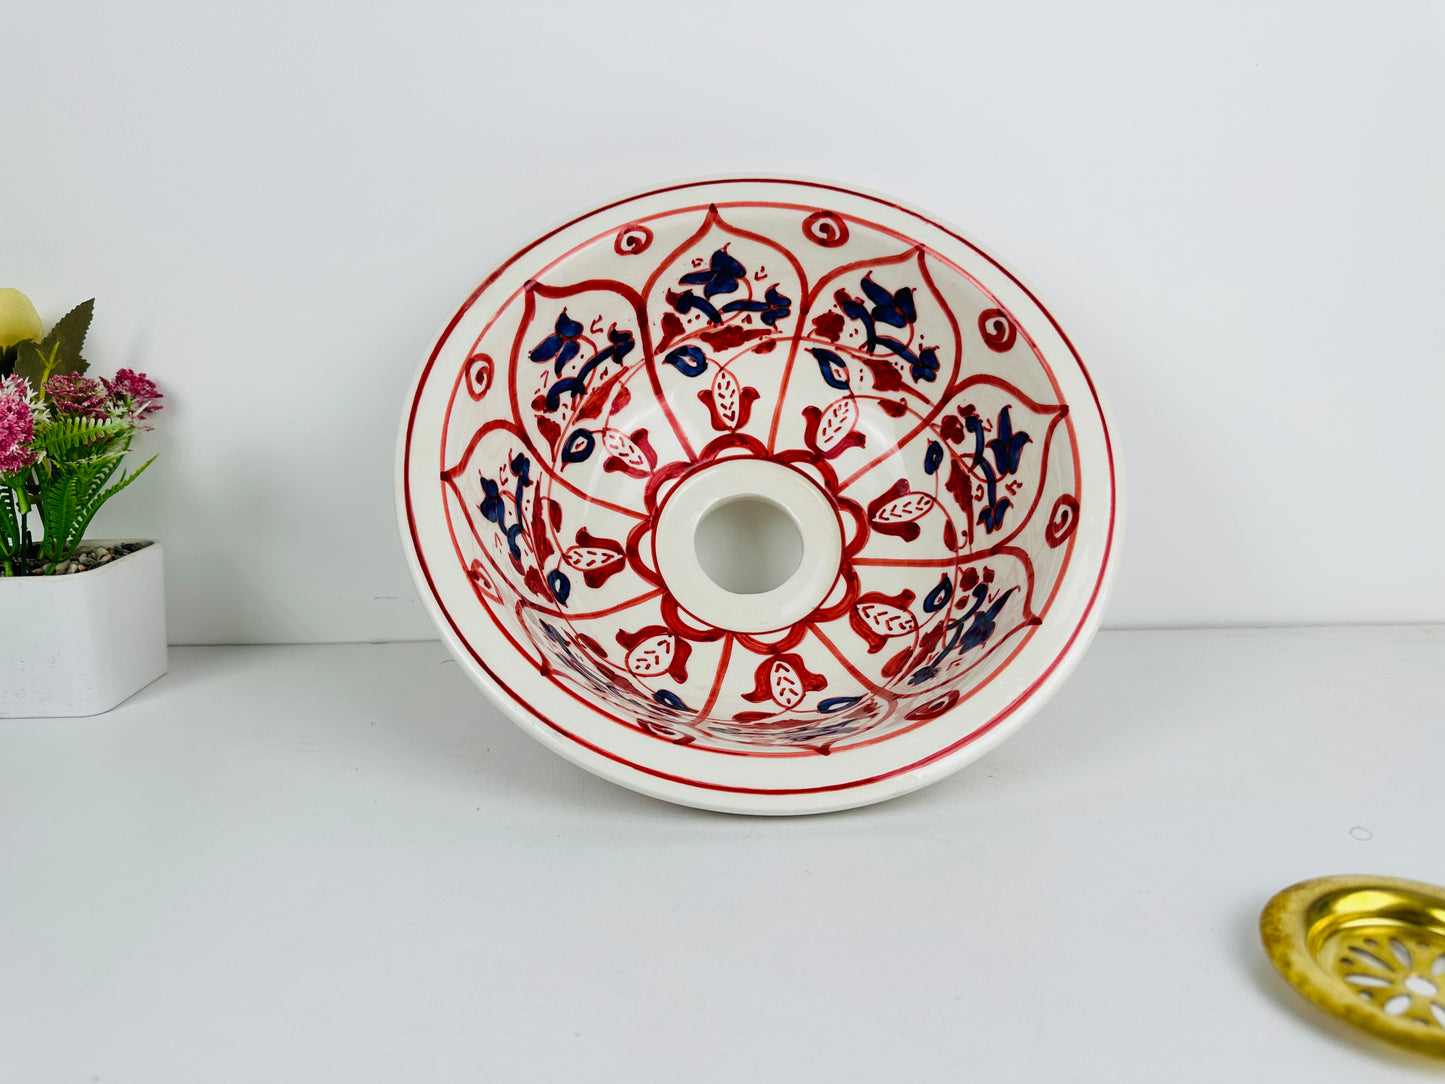 Crimson Blossoms: Handcrafted Ceramic Sink with Red and Blue Accents